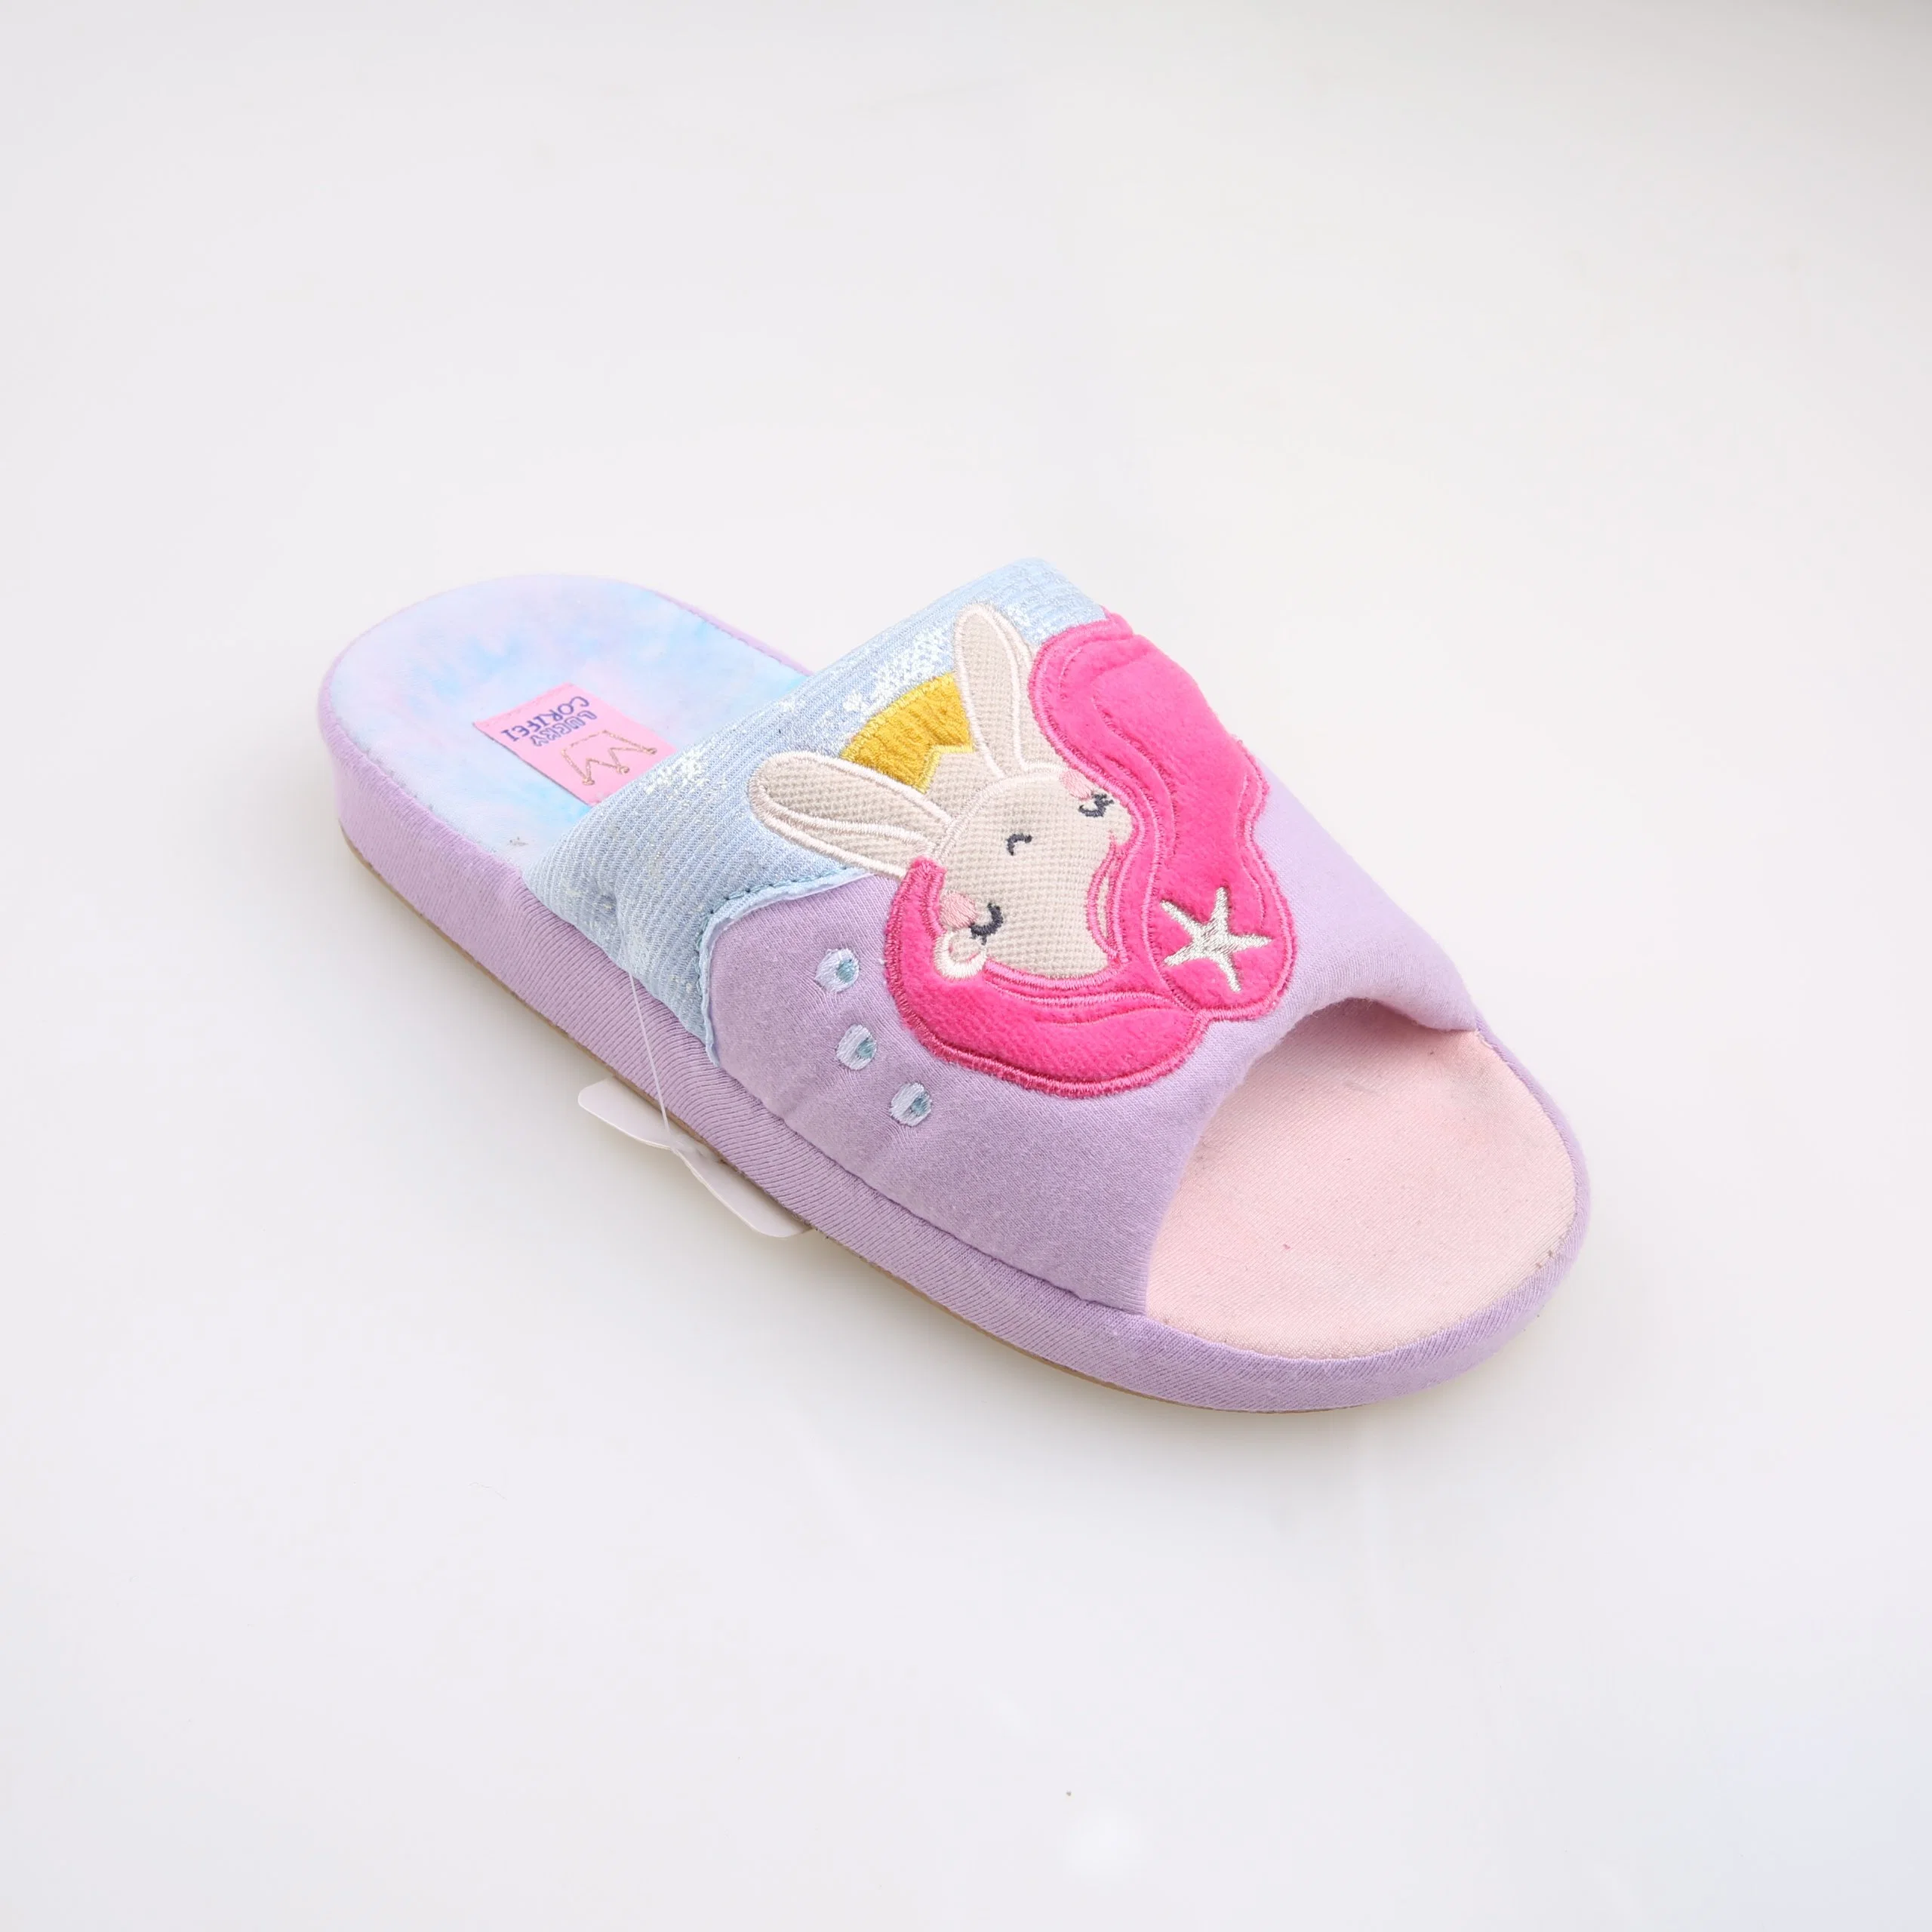 Corifei 3D Cute Mermaid Embroider Textile and TPR Kids Indoor Slipper